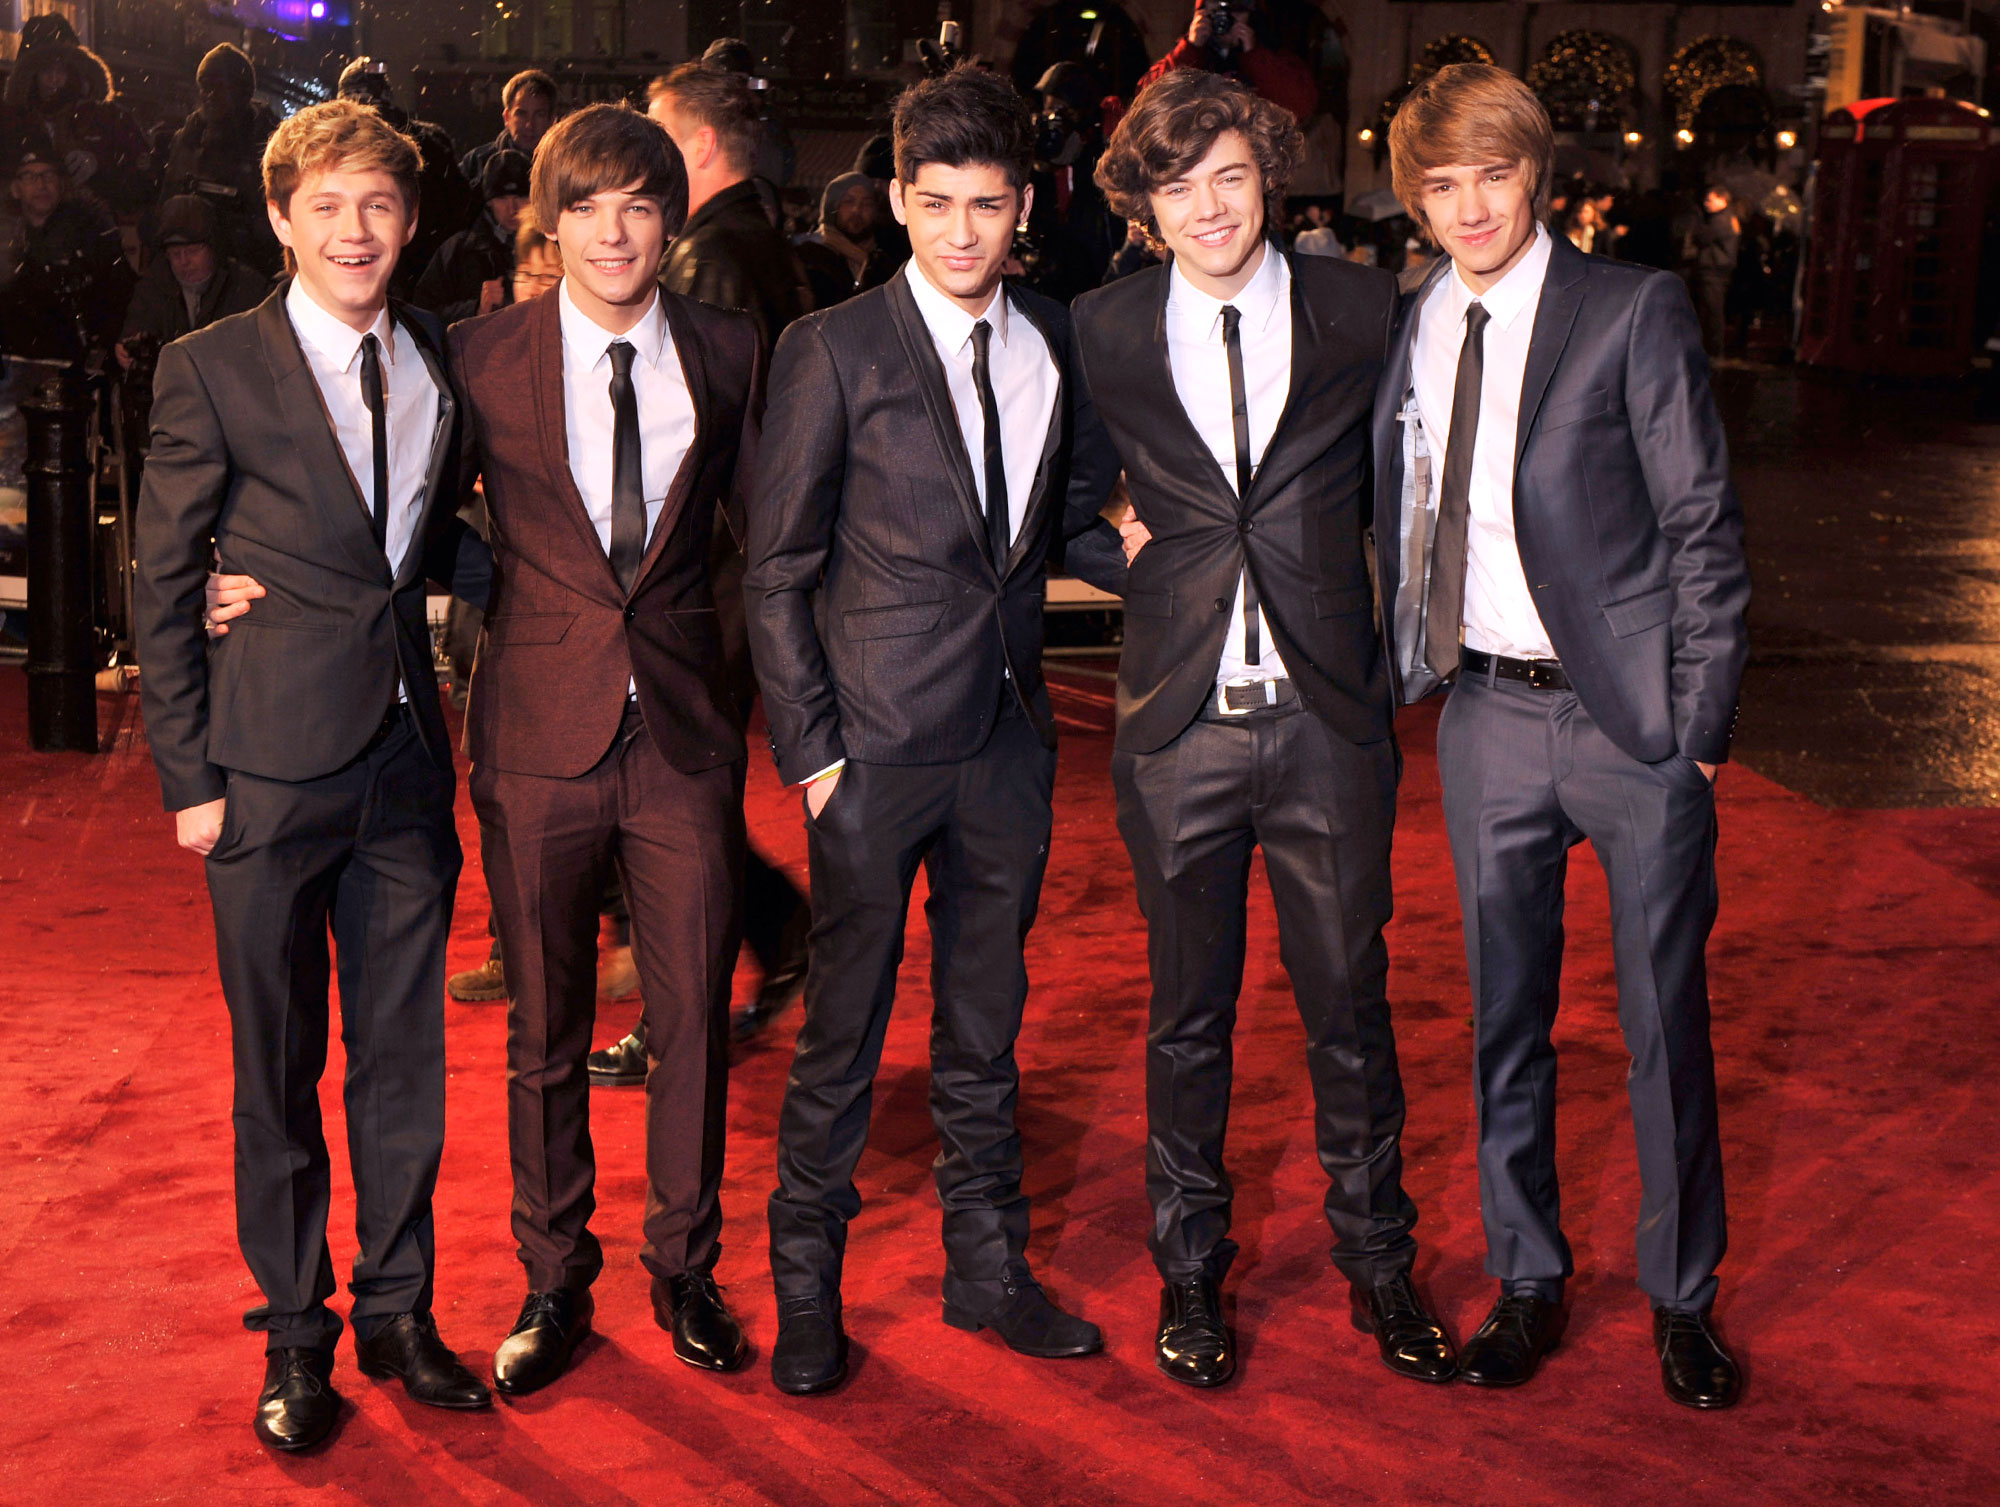 One Direction stands together on the red carpet in 2010.